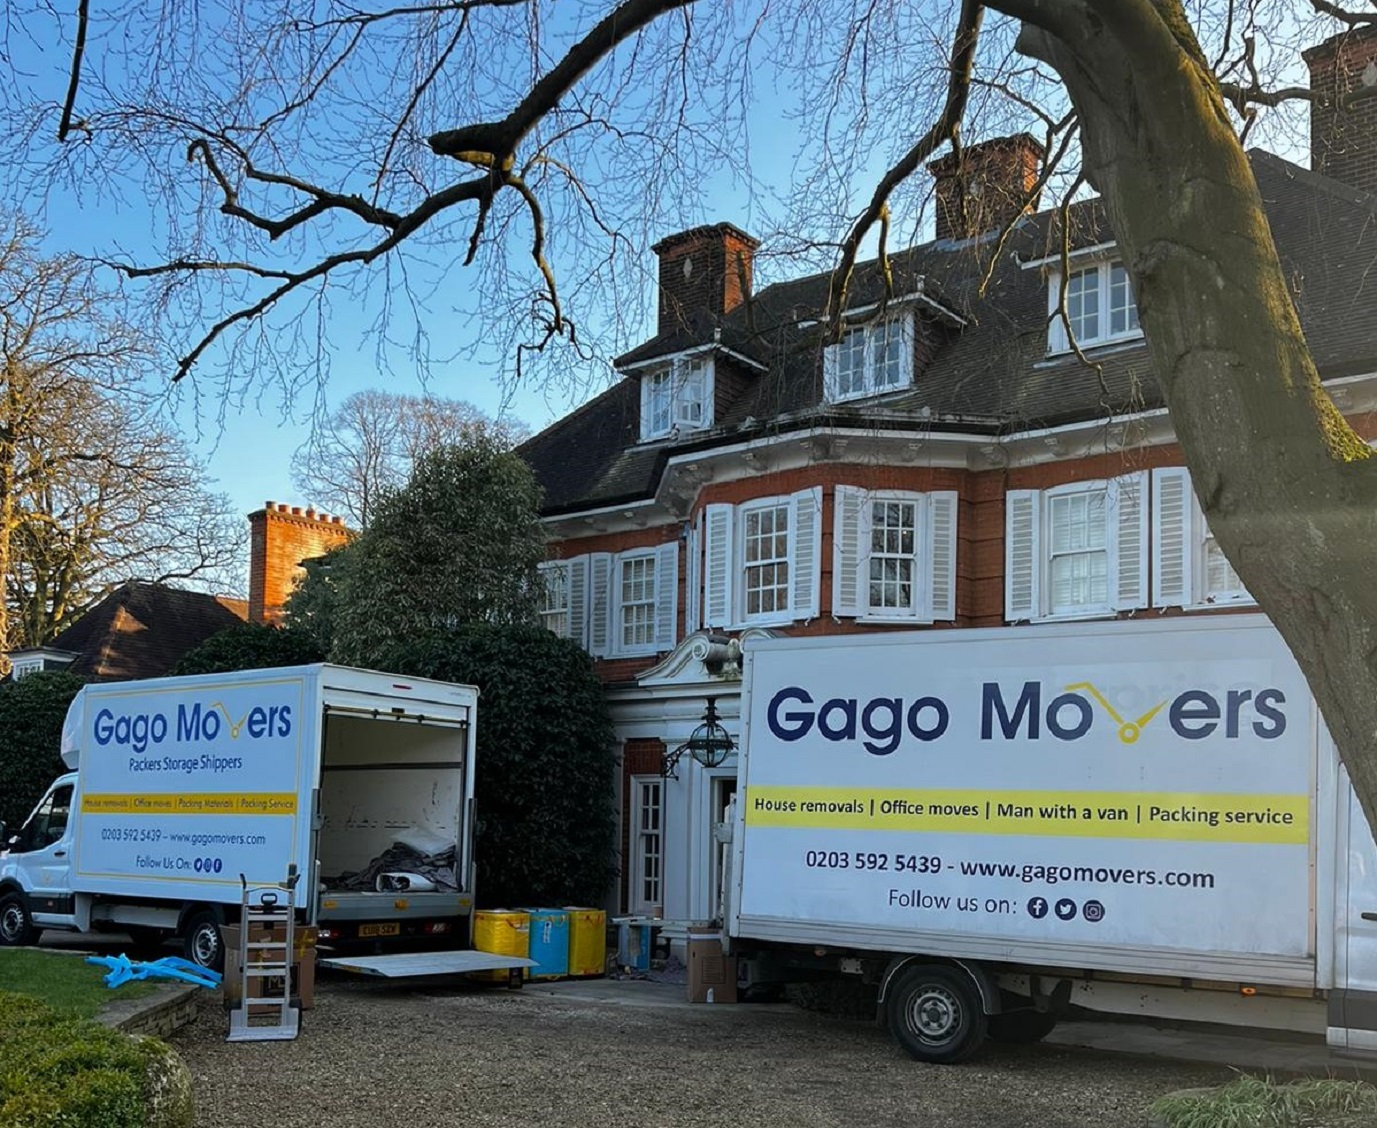 Gago Movers Local Movers in London